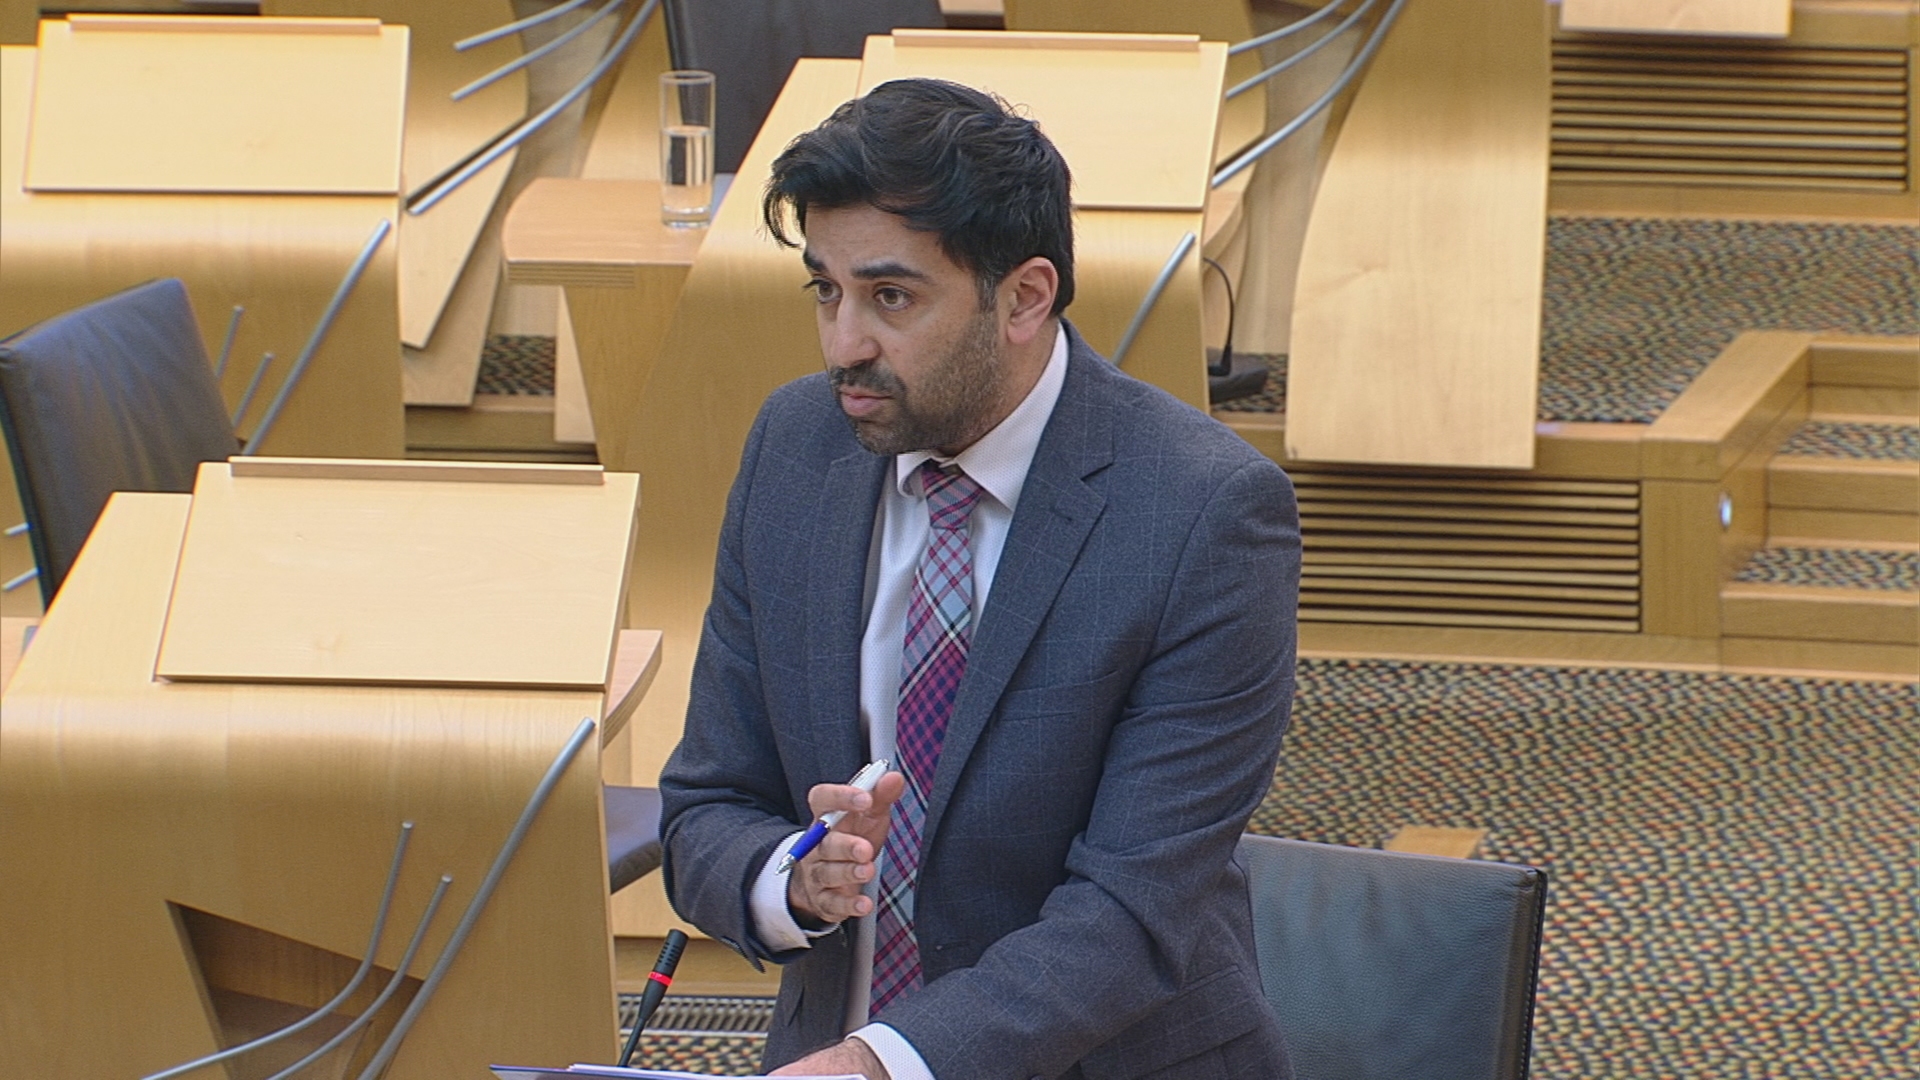 The health secretary made a statement at Holyrood. (Scottish Parliament TV)